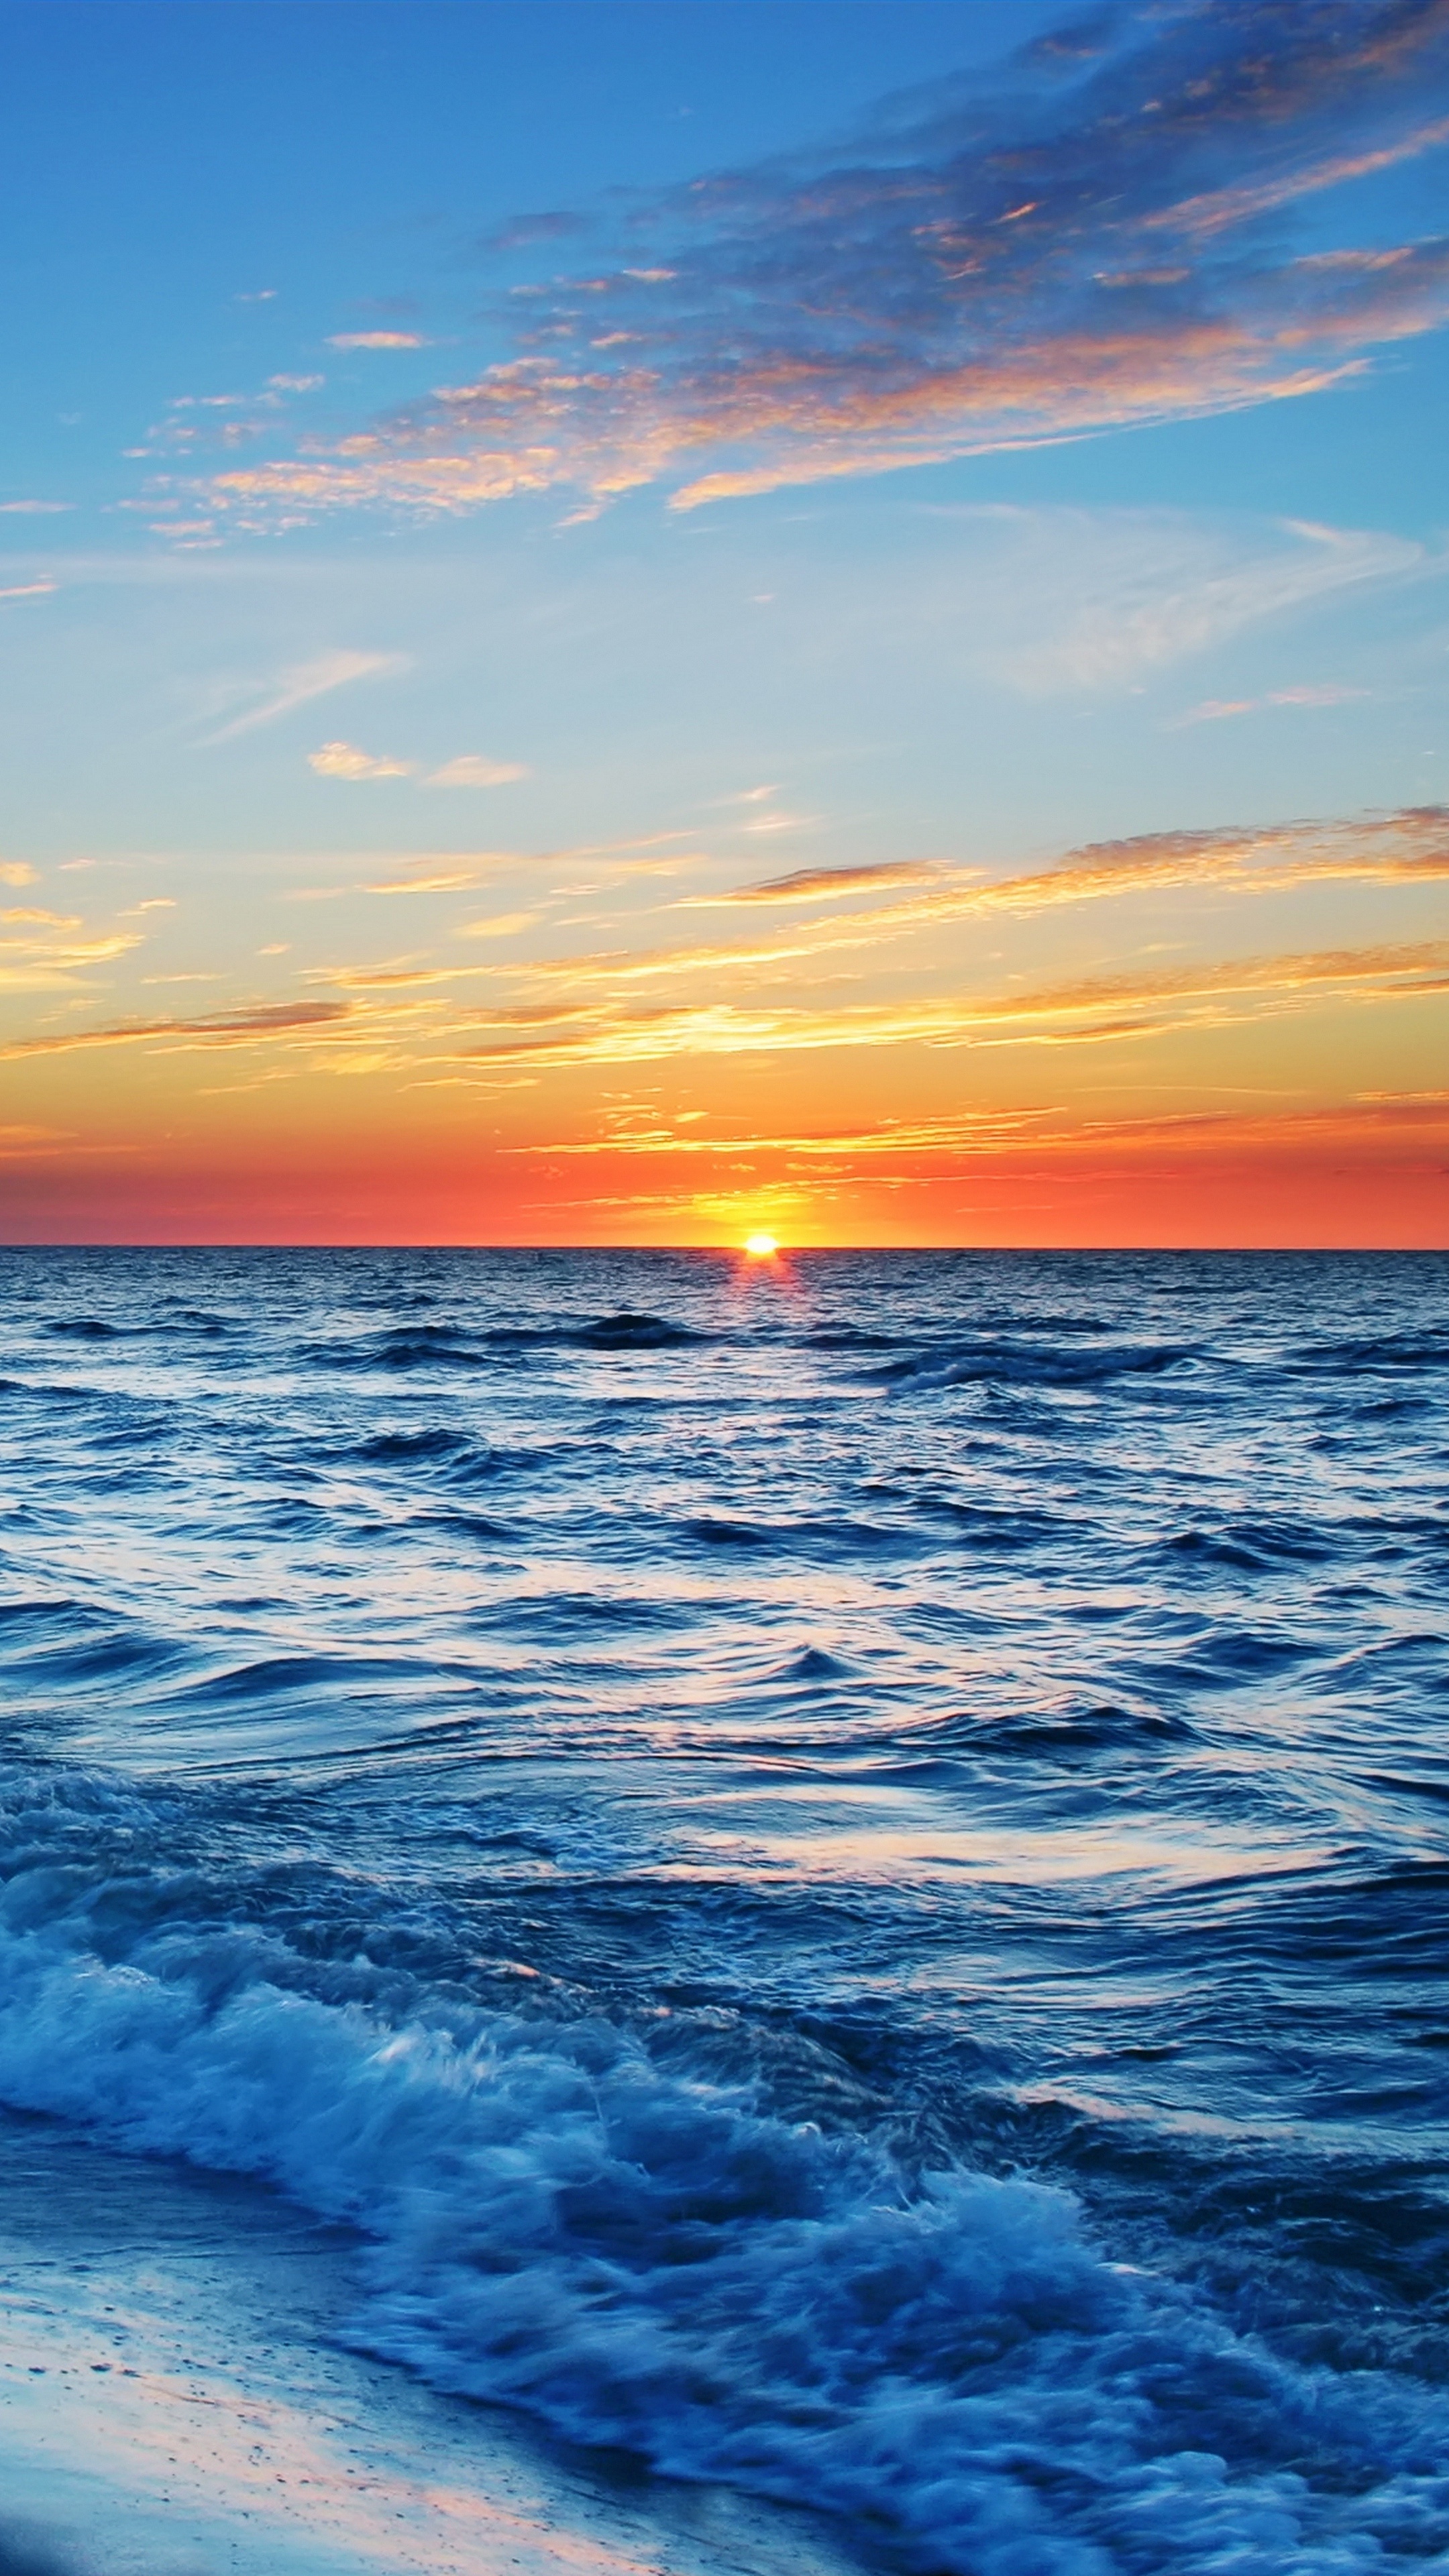 Seascape: The marvelous sunset view from the sea beach, attacked by small waves. 2160x3840 4K Background.